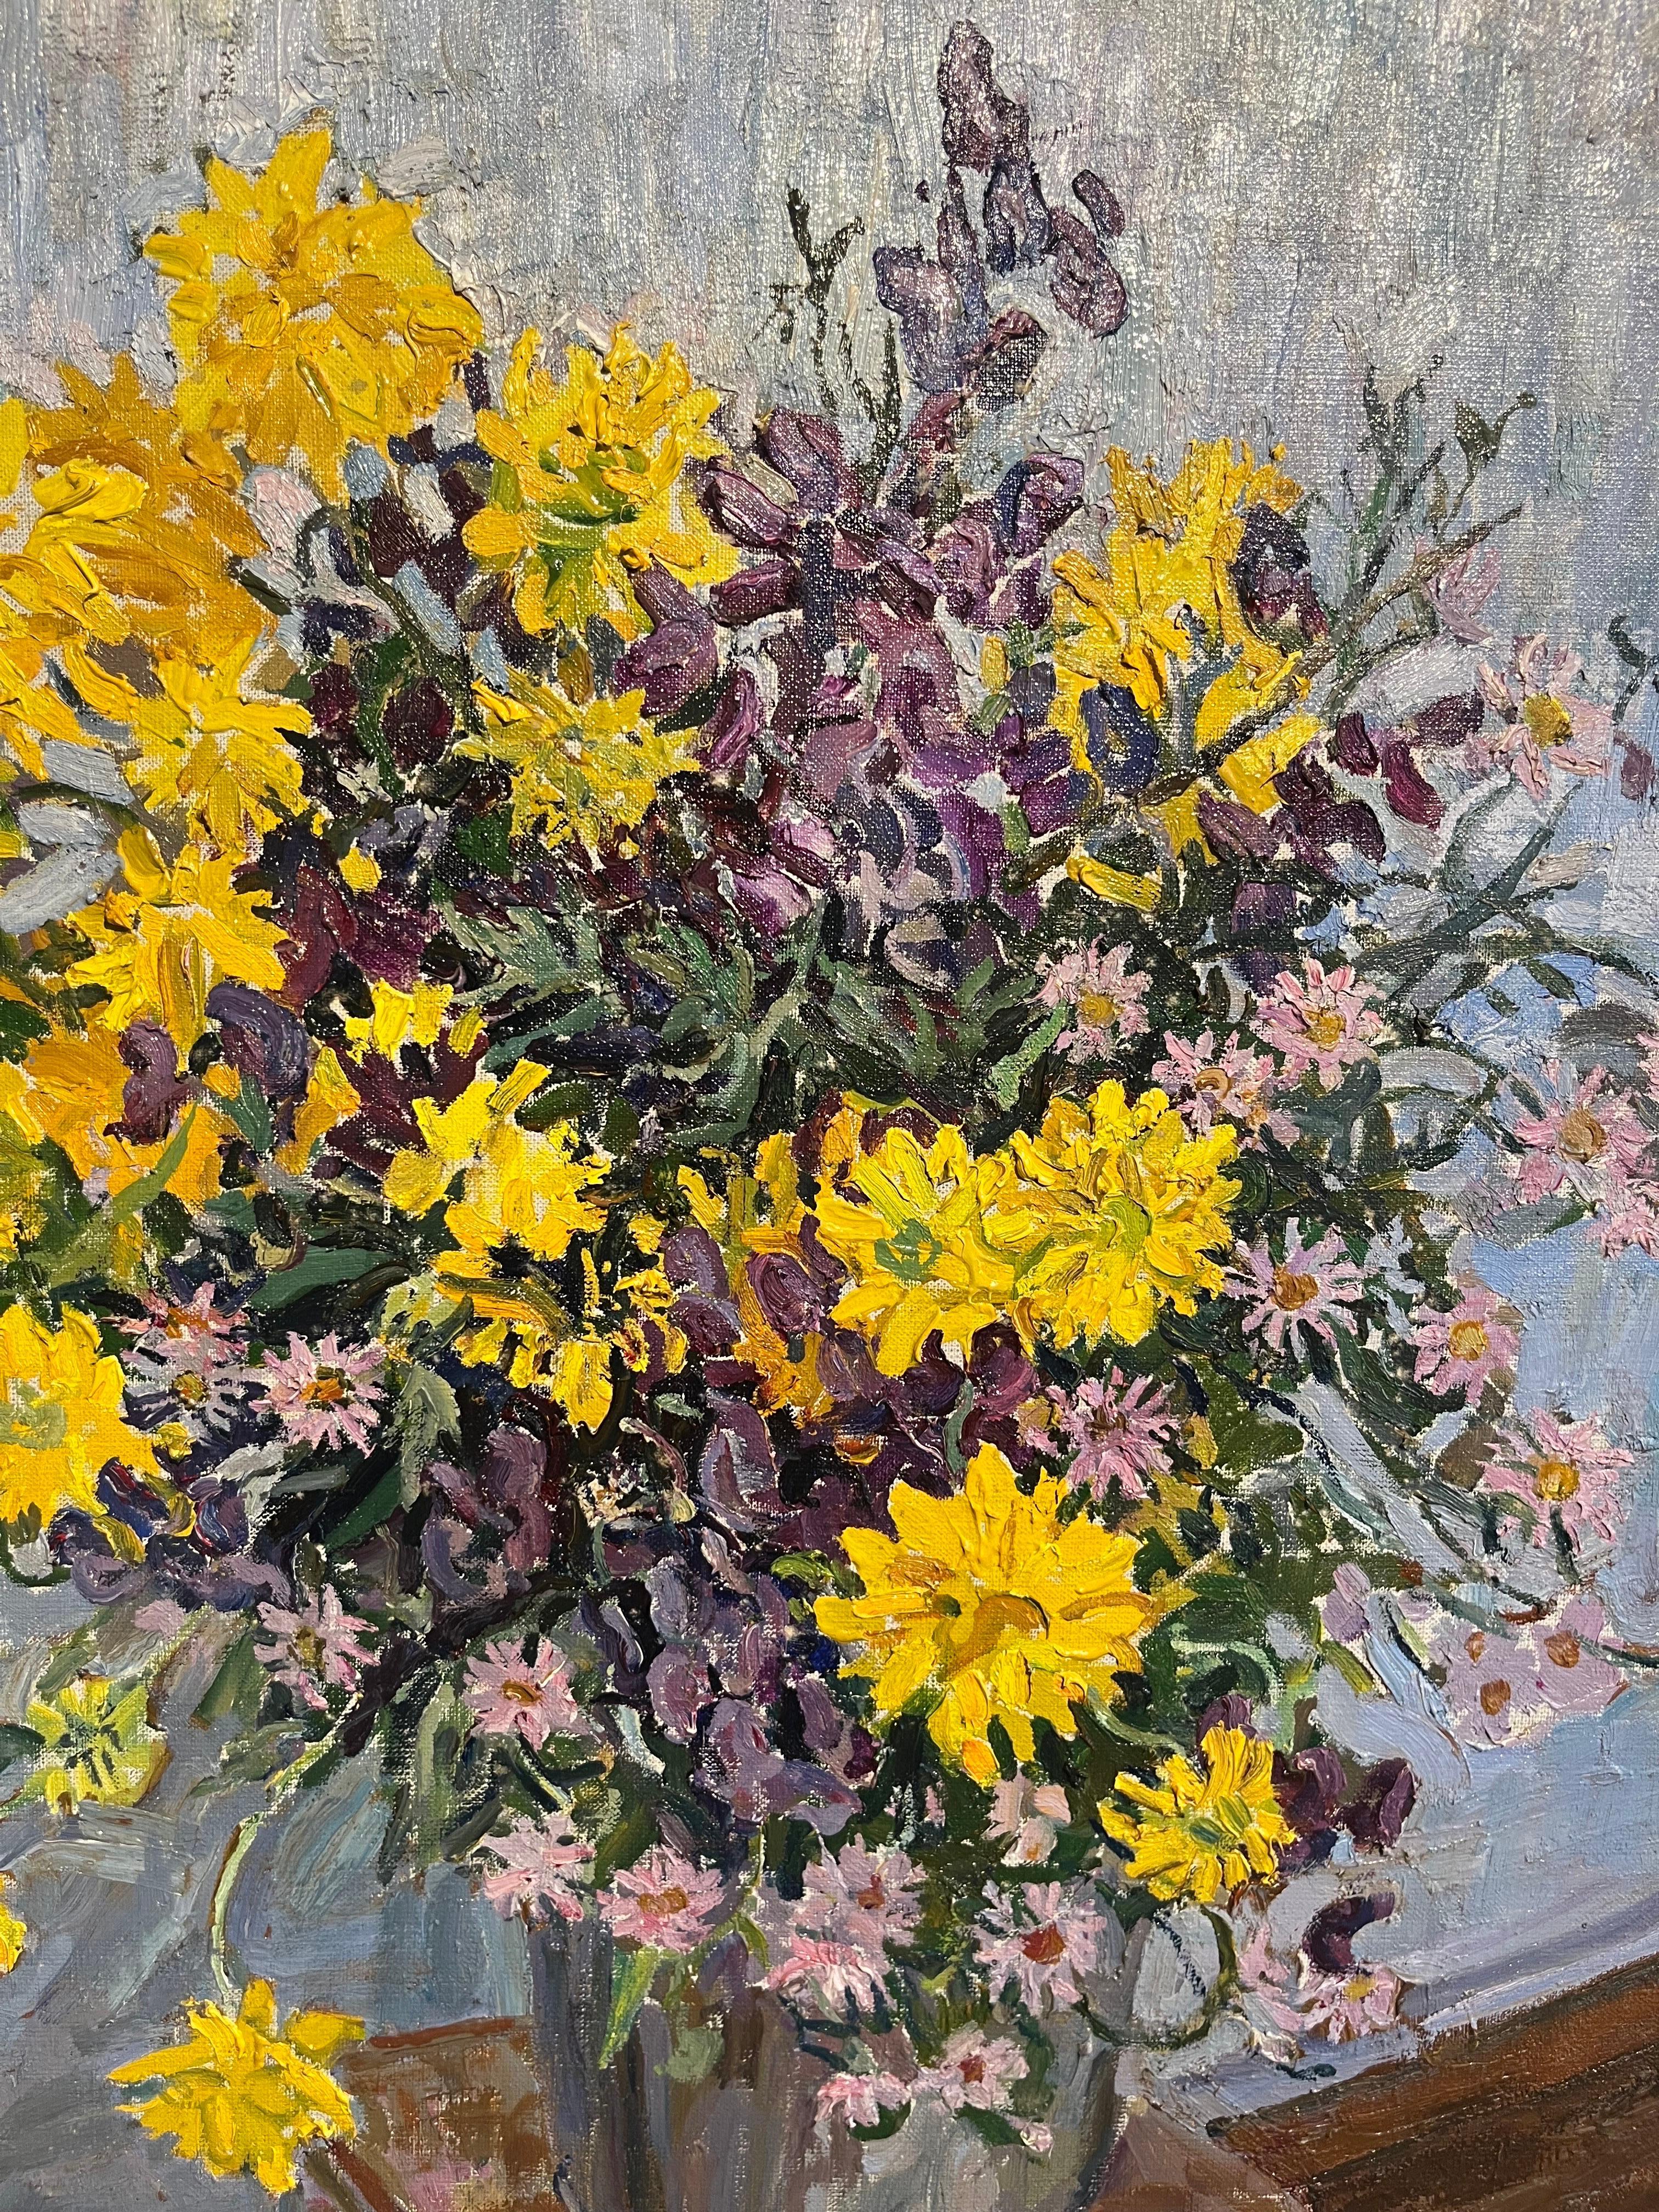 Flowers,Summer,Yellow,Blue,Pink
MAYA KOPITZEVA    (Gagra, Georgia, 1924 - 2005)

Maya Kopitzeva’s works have been acquired by the Russian Ministry of Culture, by the Foundation for the Russian Culture, by various collectors in Europe, Japan, United